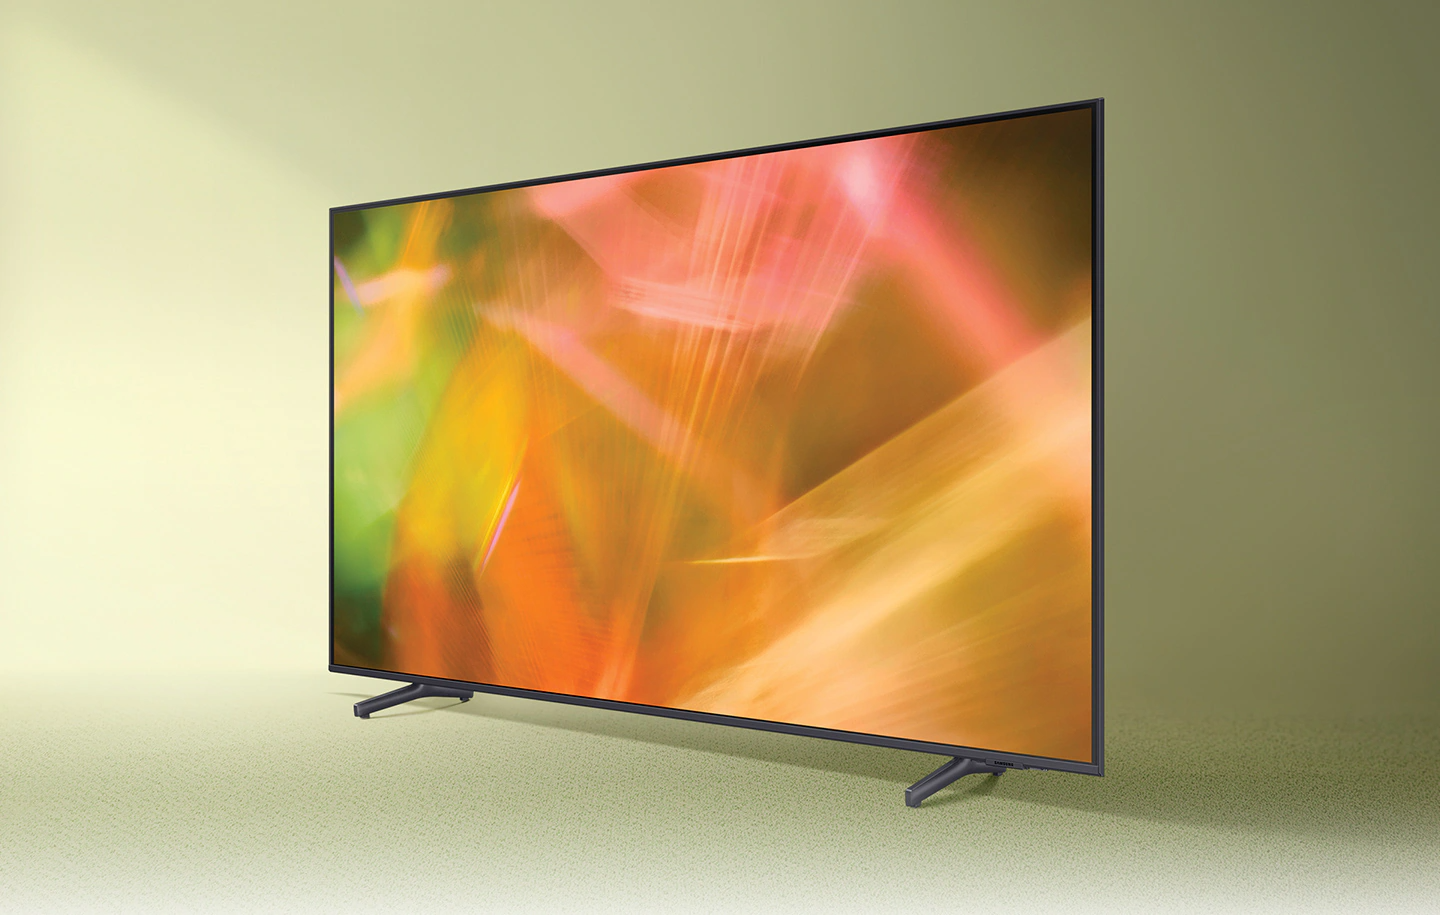 AU8000 displays intricately blended colour graphics which demonstrate vivid crystal colour.